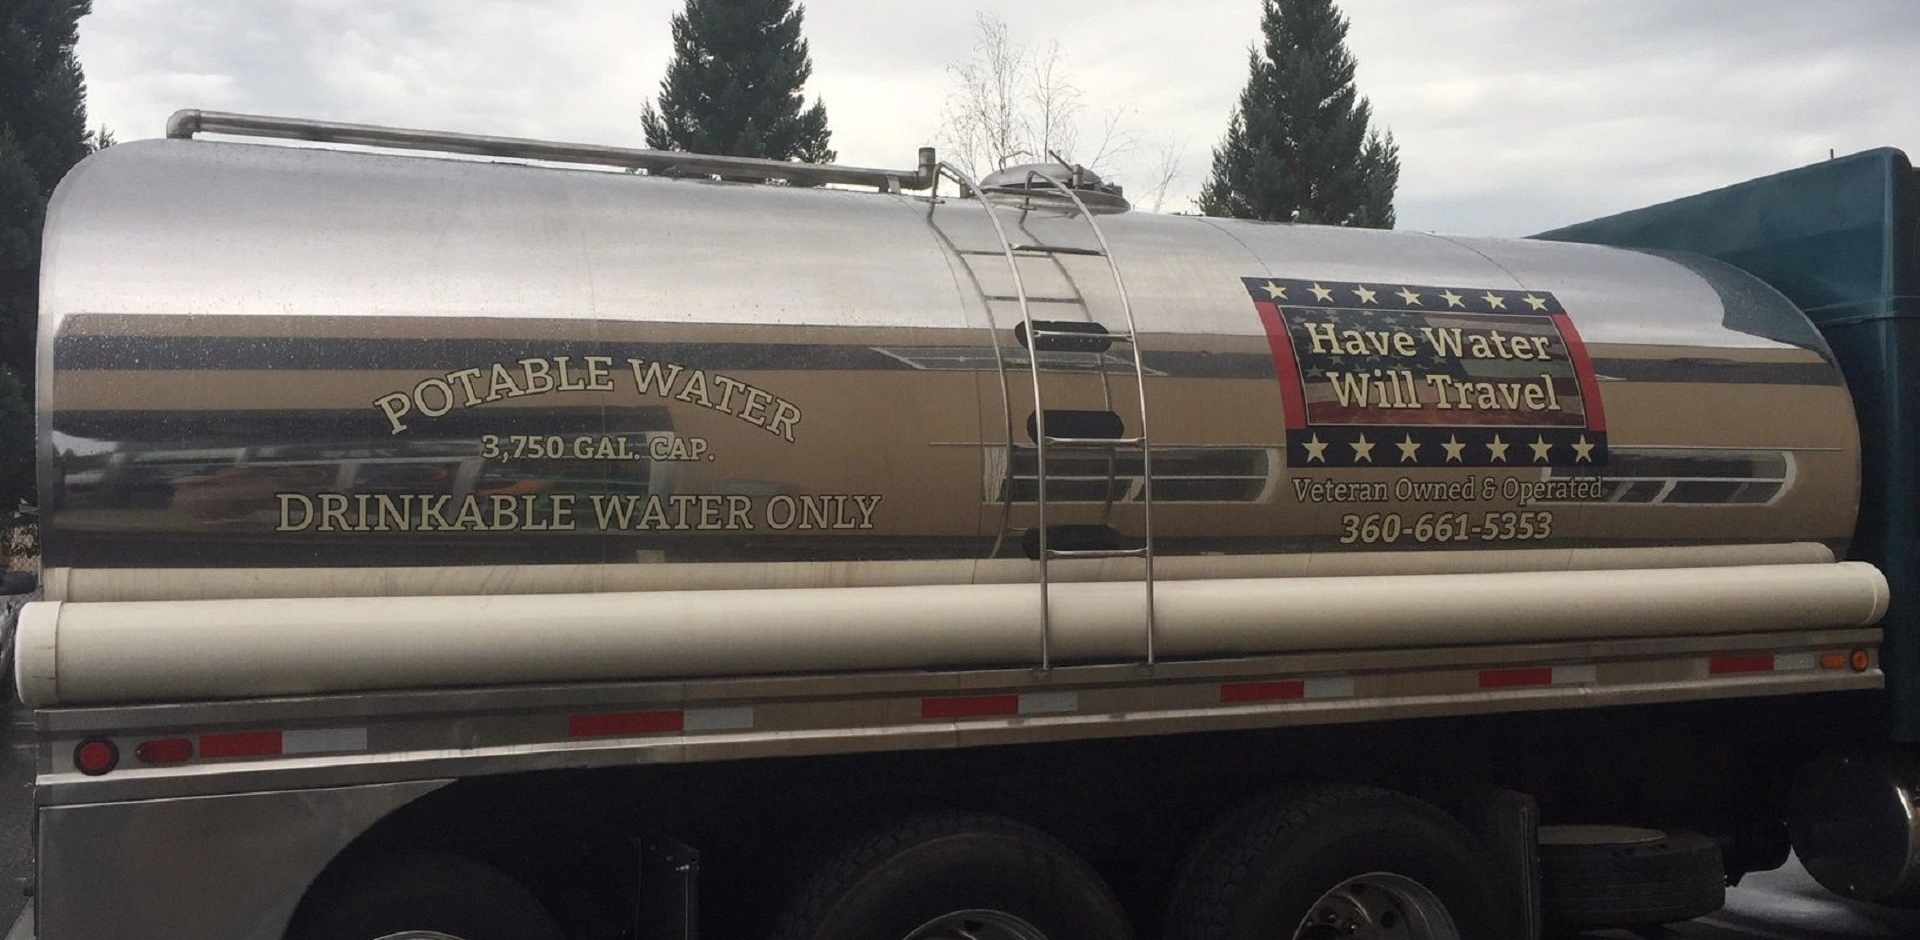 Potable Water Solutions for Northwest Washington and Beyond